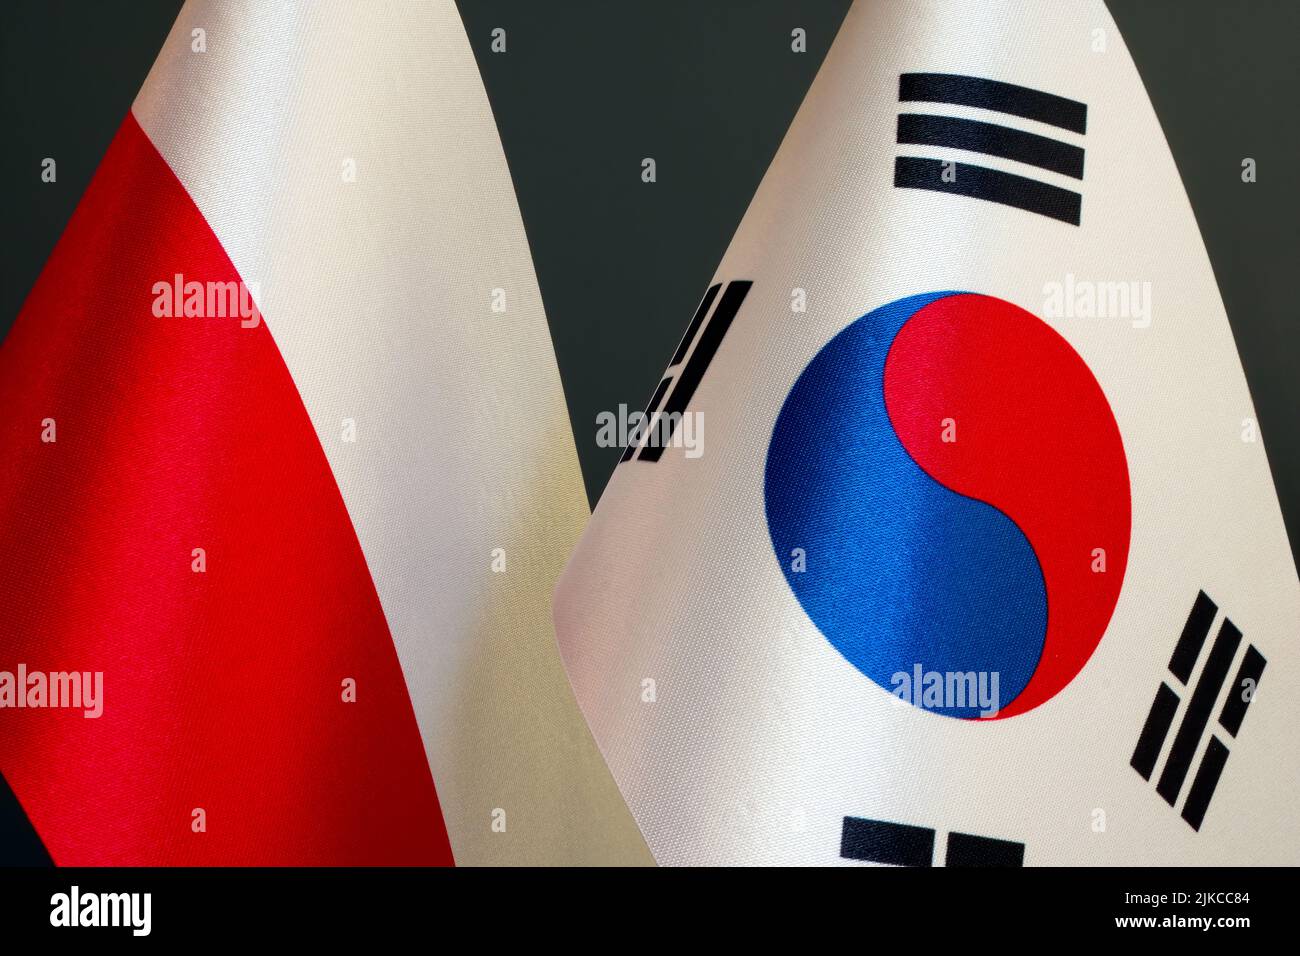 Flags of Poland and South Korea side by side. Stock Photo